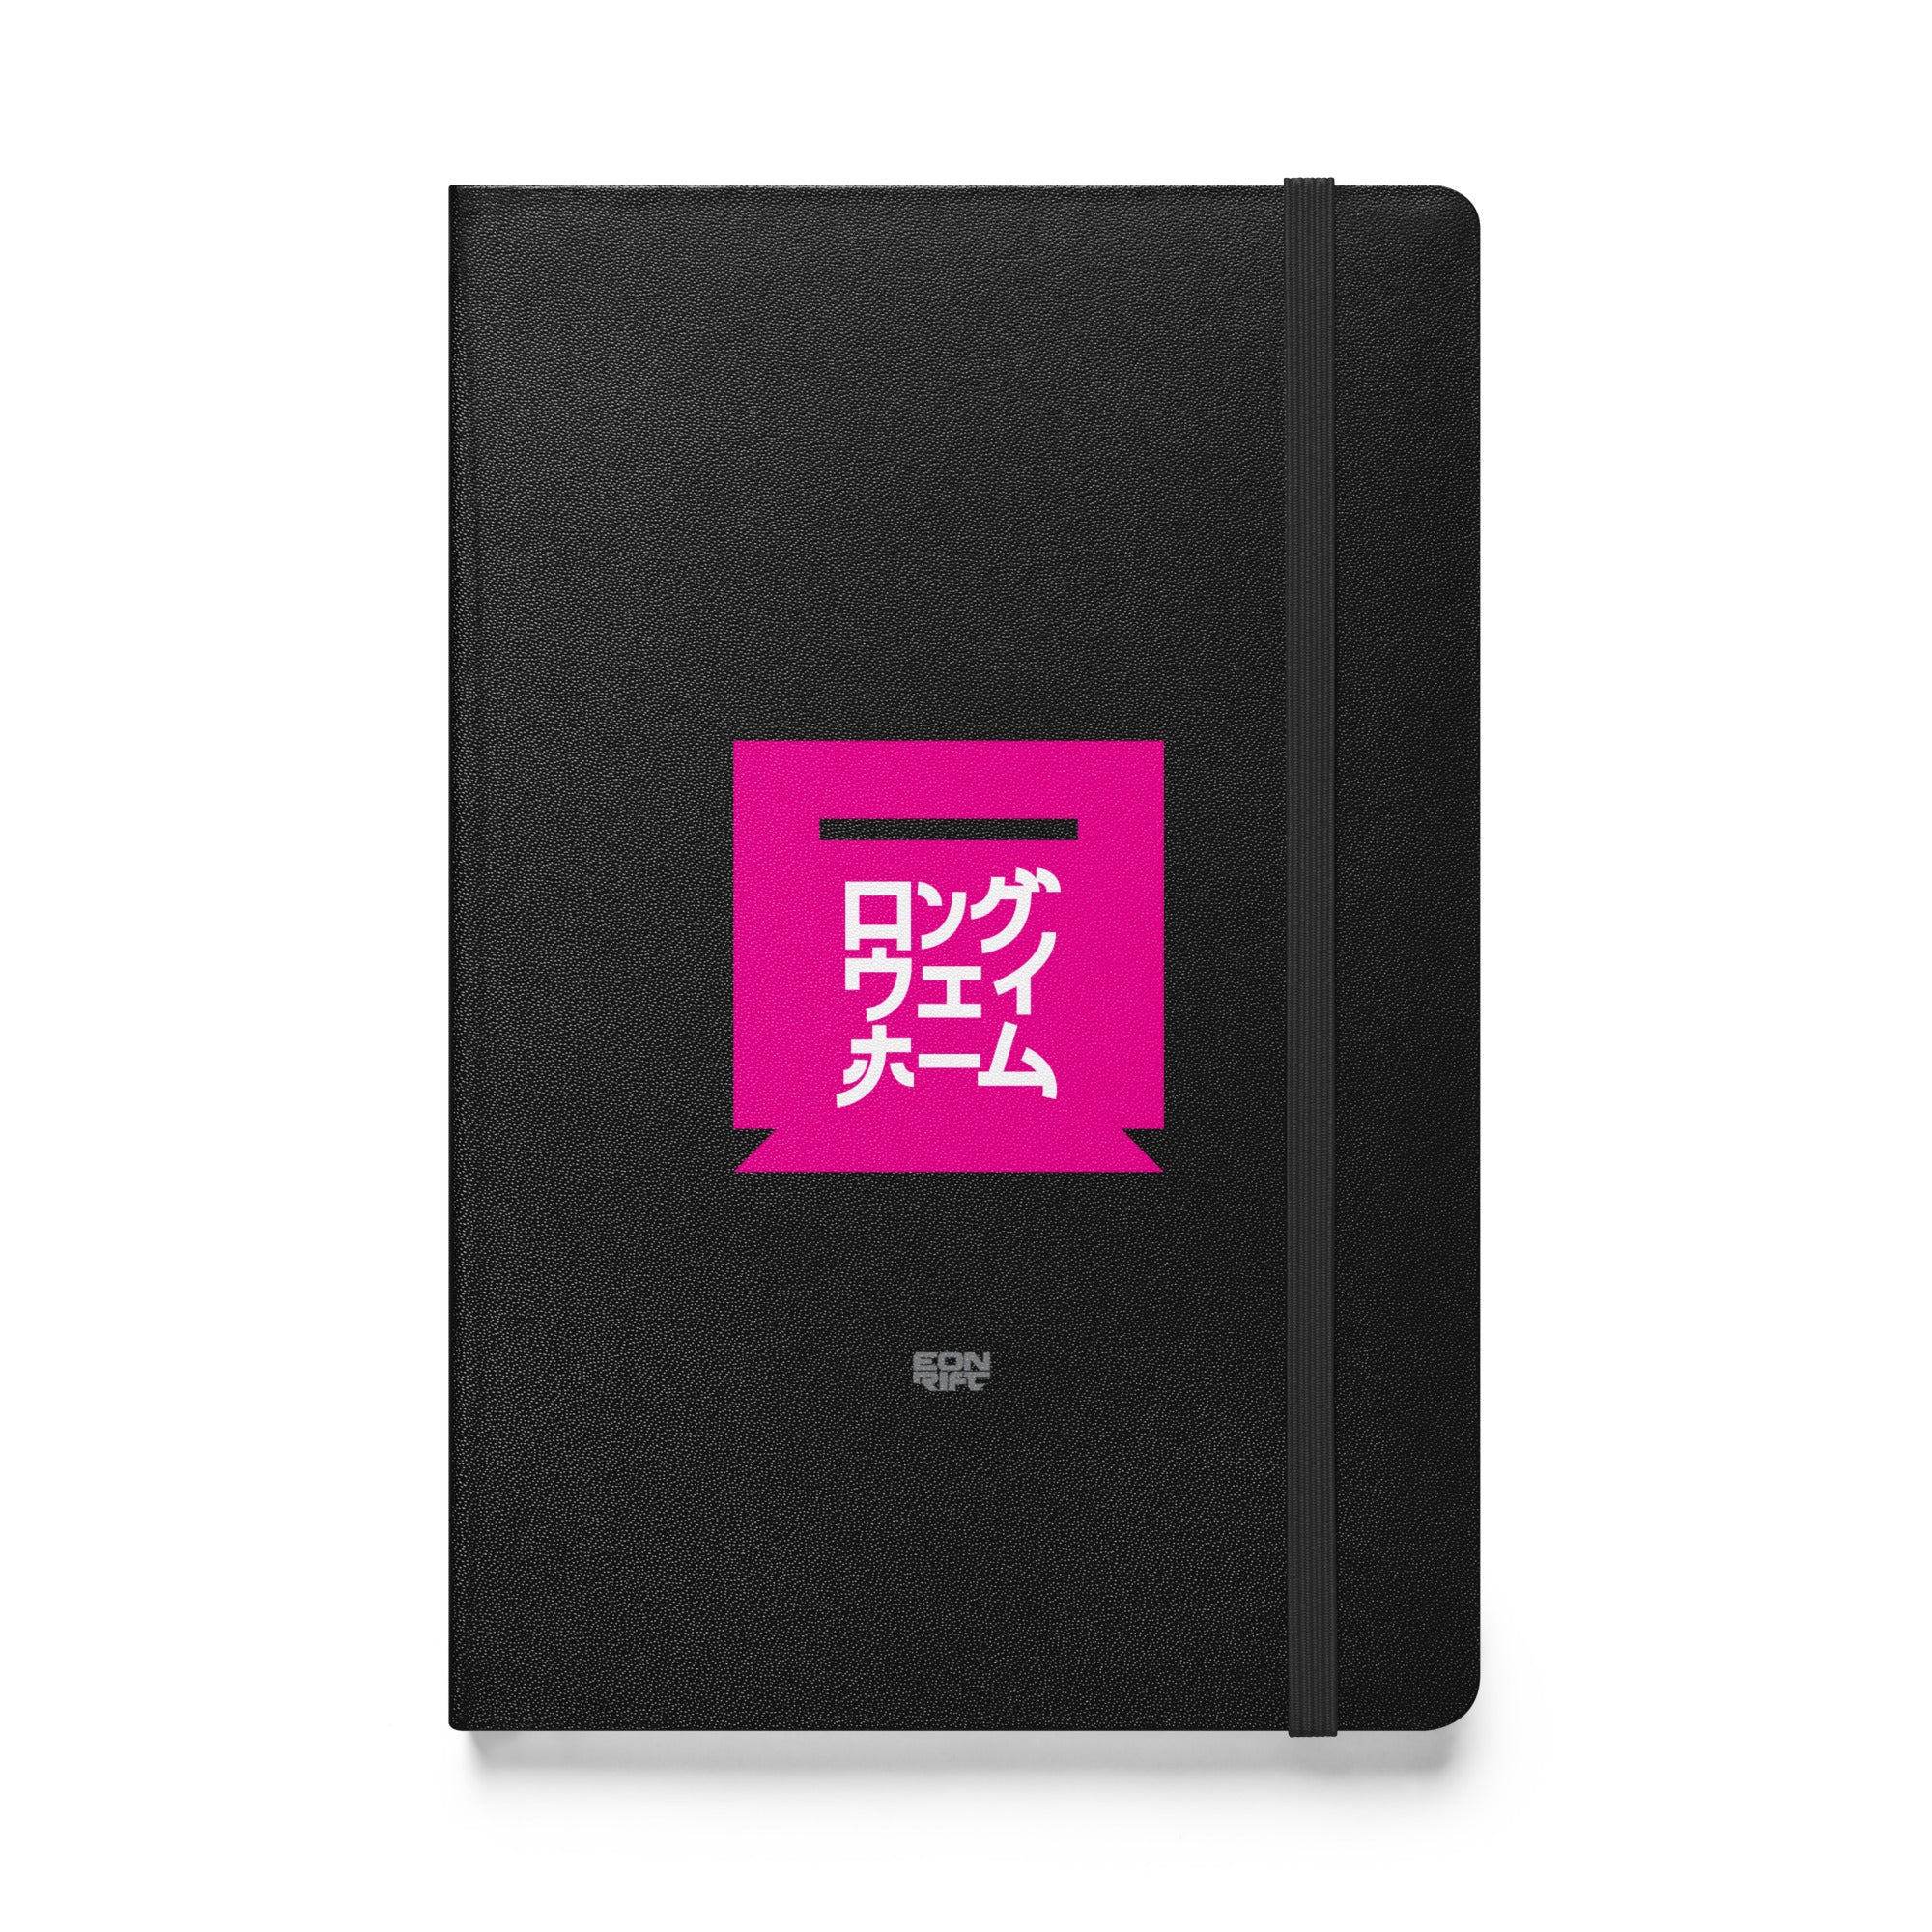 PINKLWH | Hardcover bound notebook